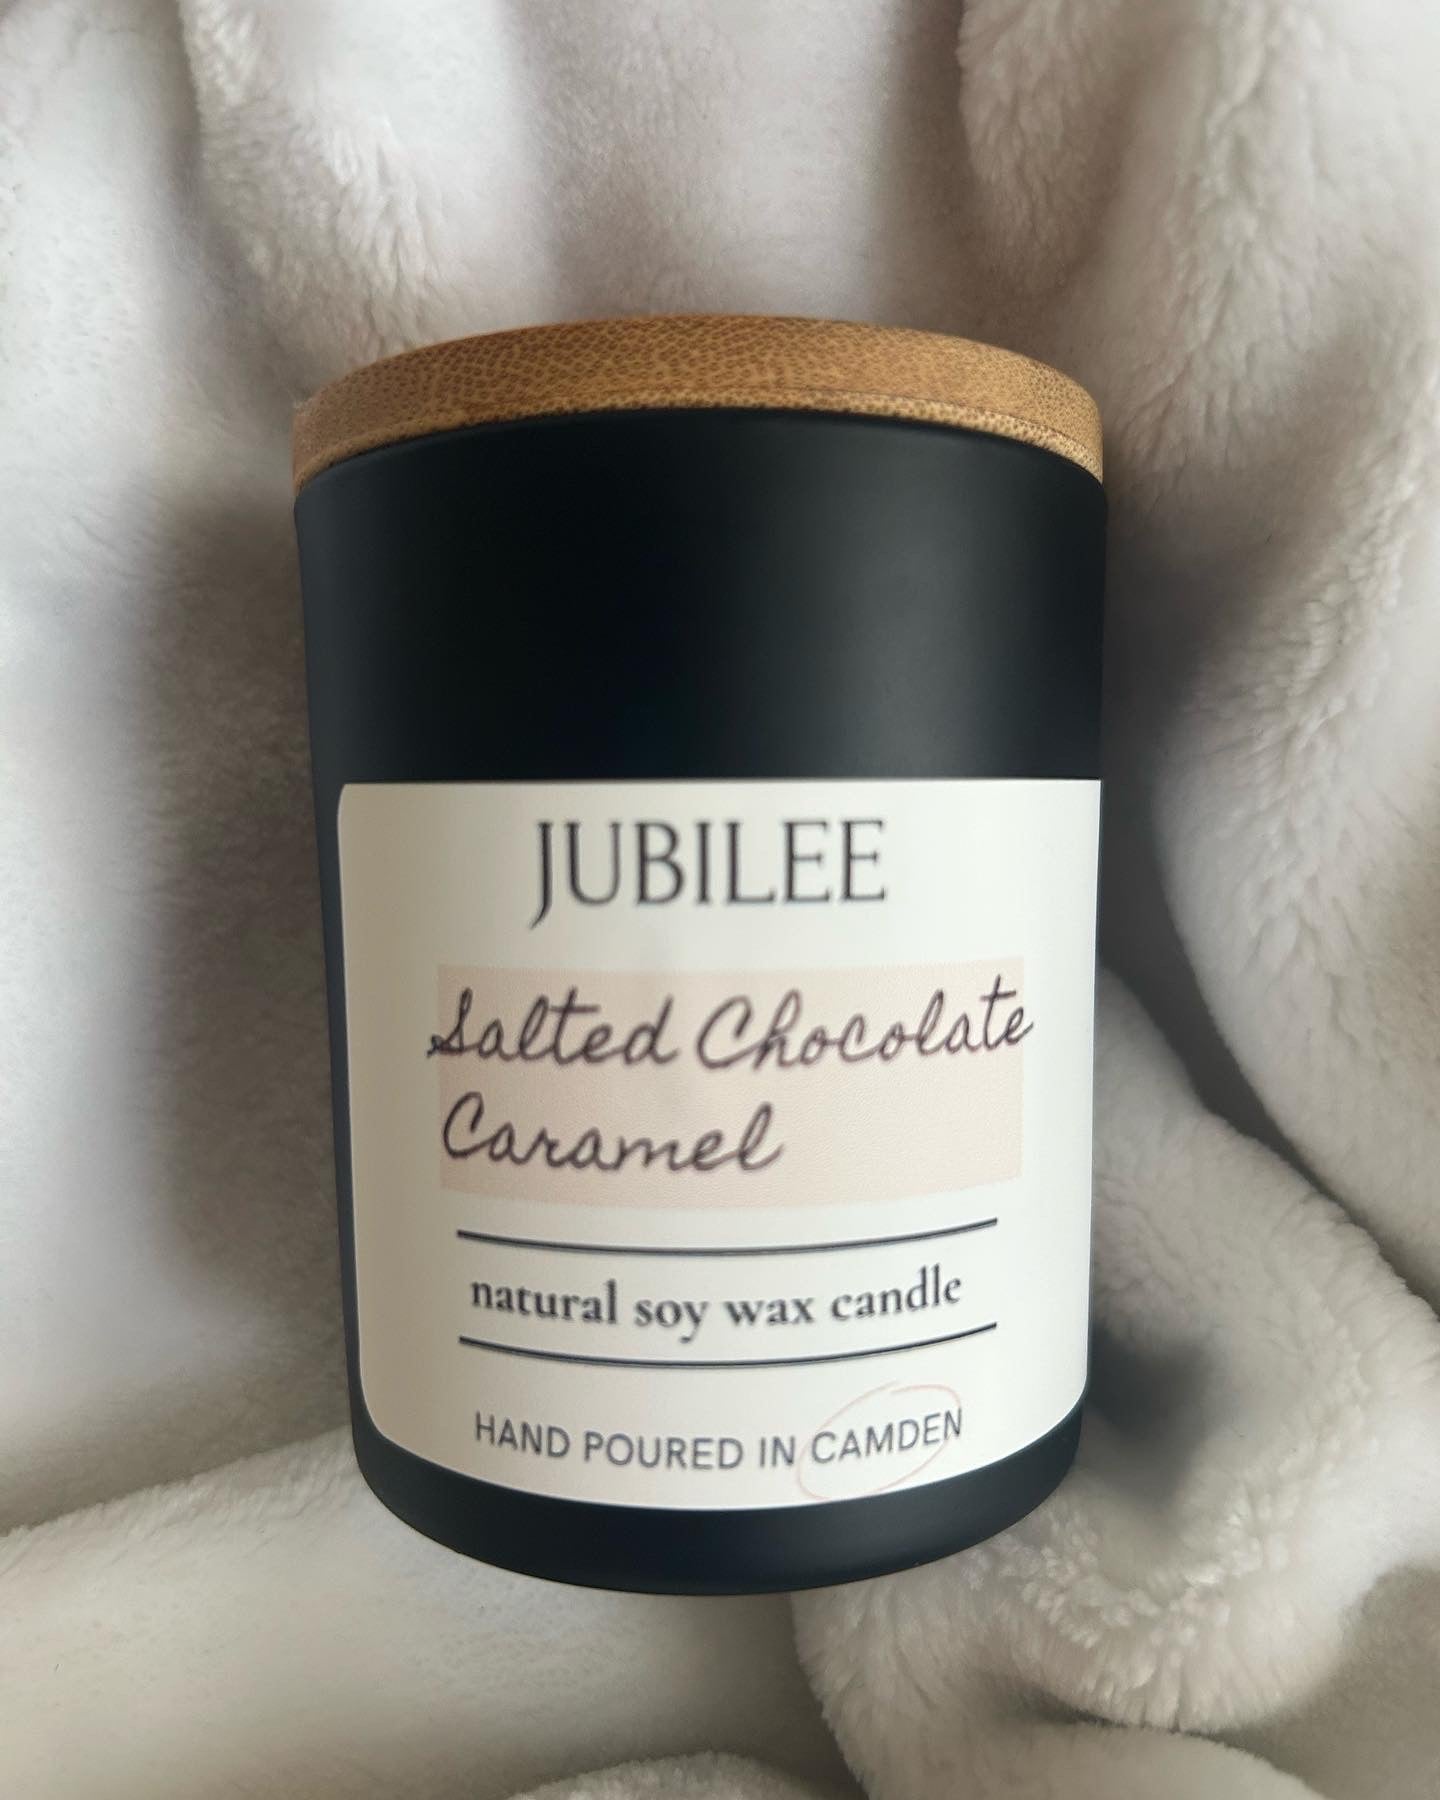 NEW! salted chocolate caramel candle